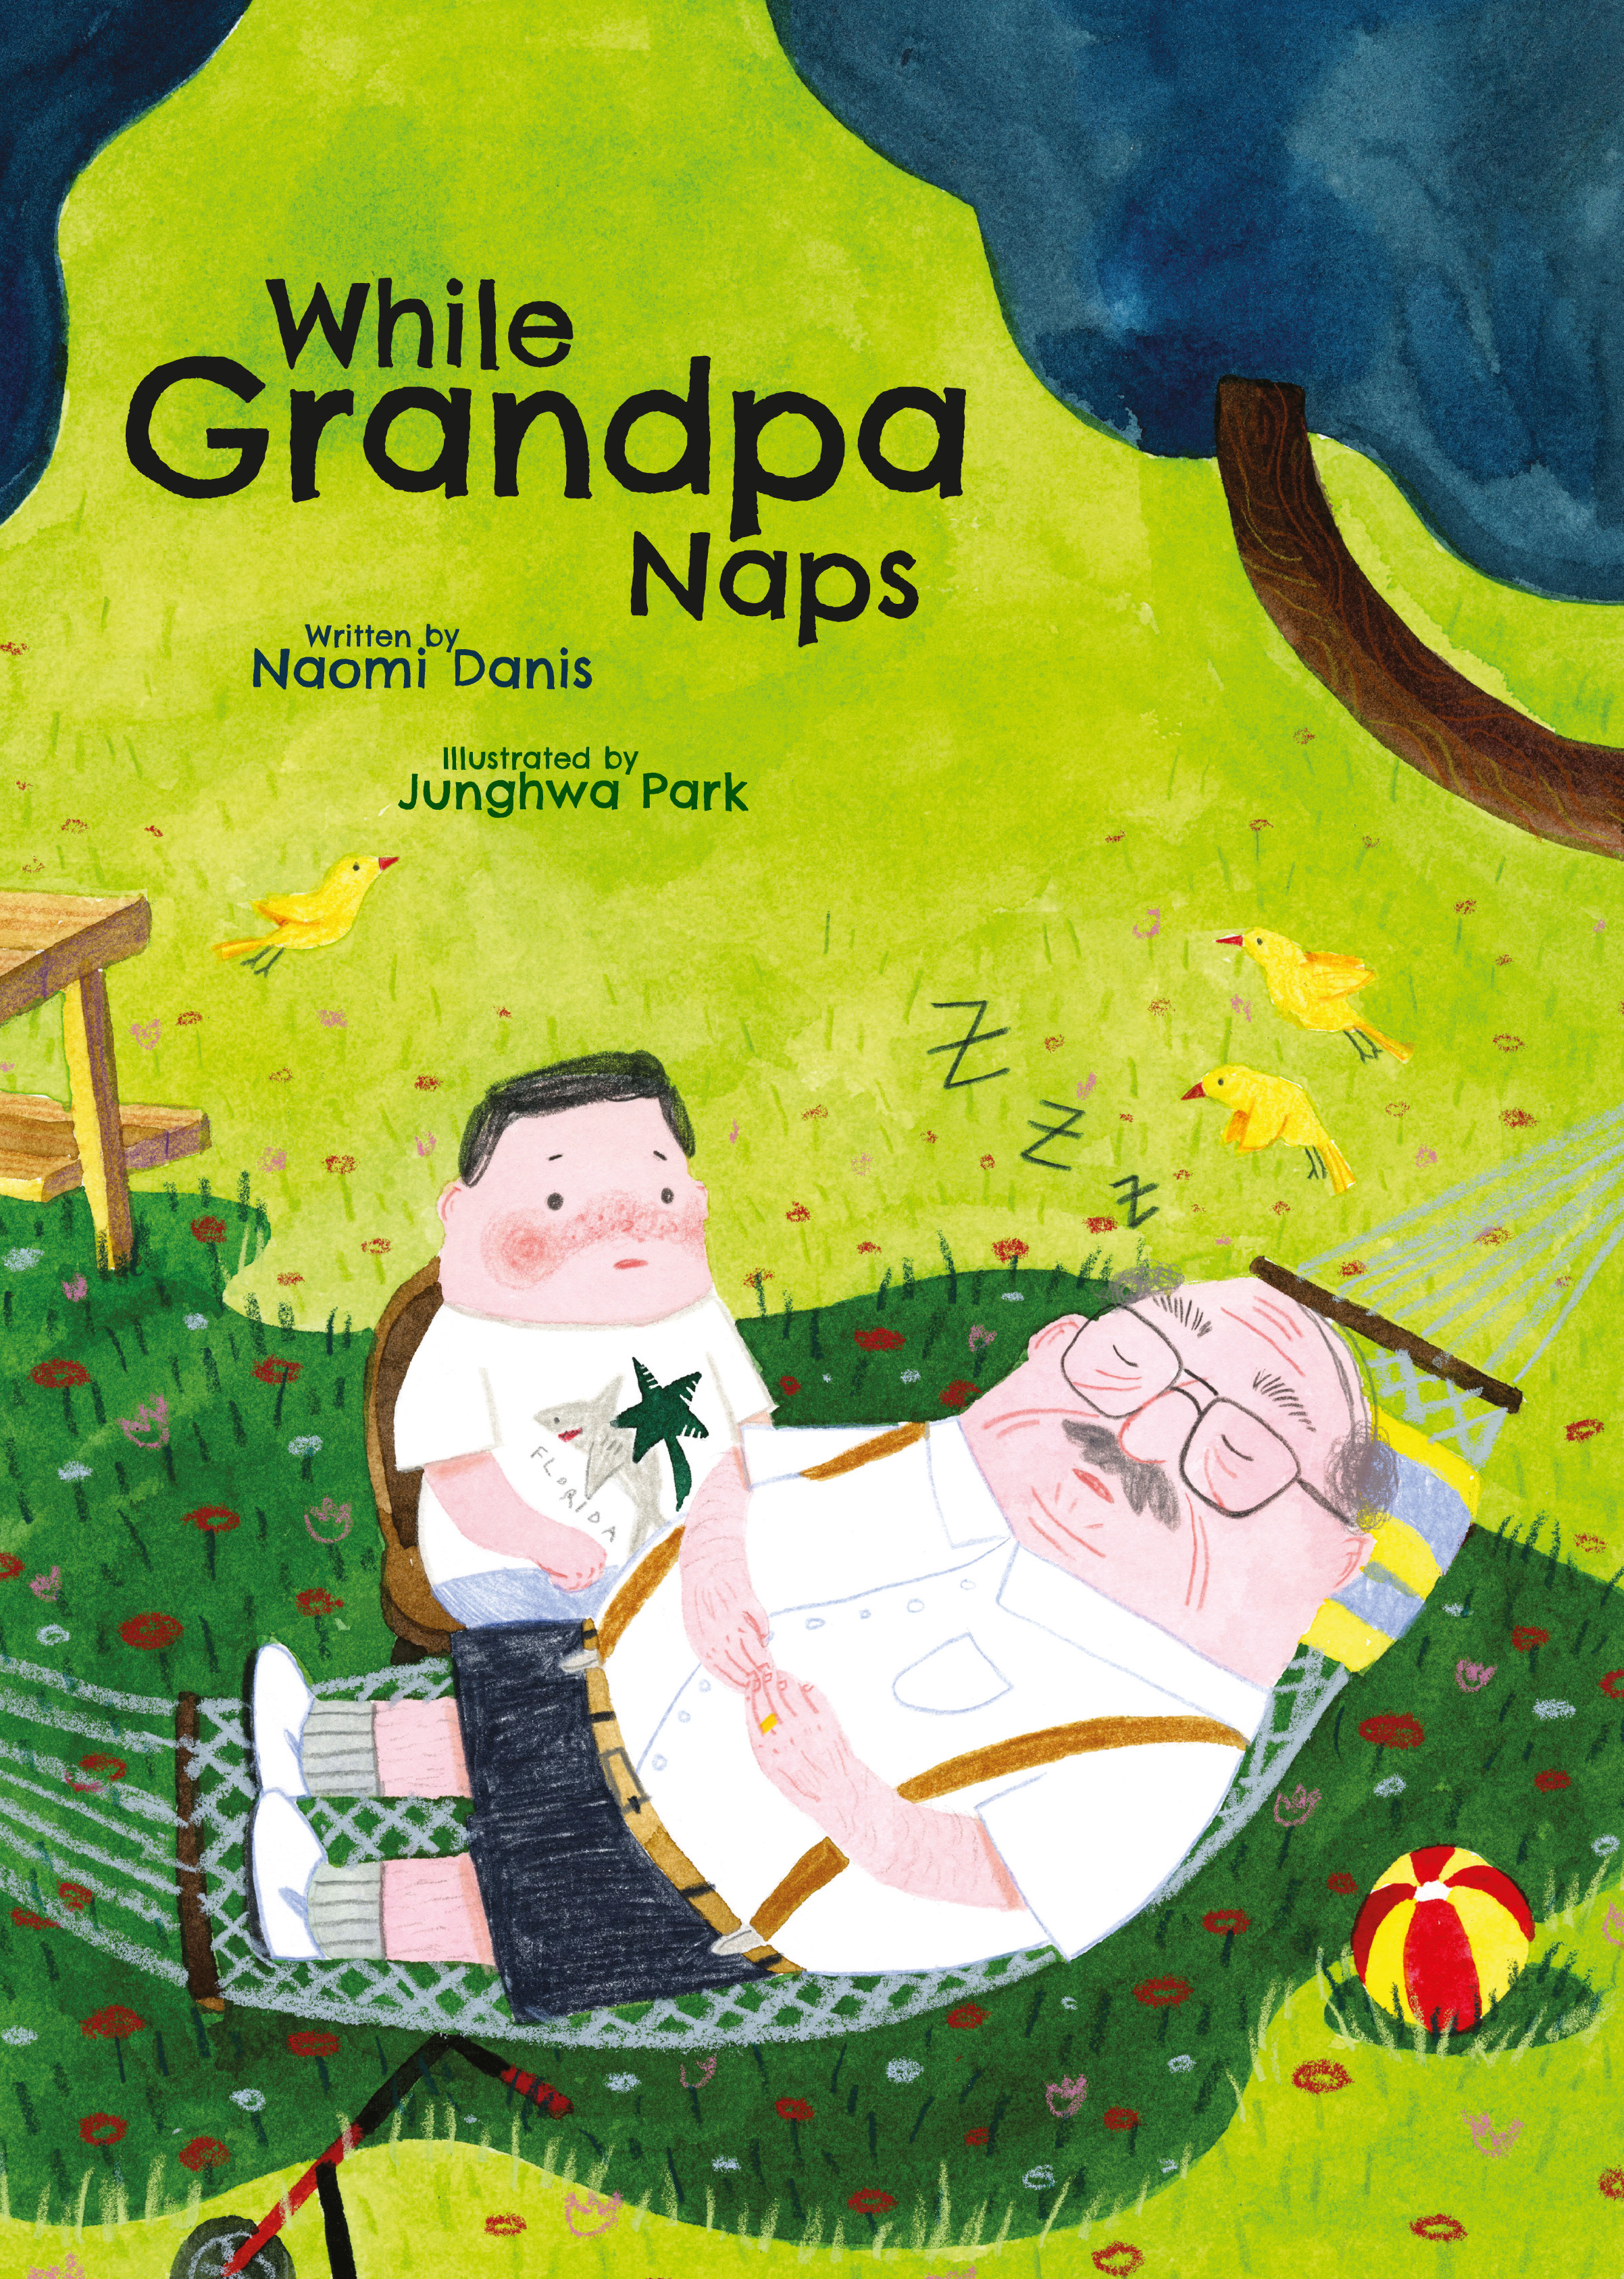 A moving, funny, elegant meditation on love, childhood, and one's place in a family.  Gilbert spends a sunny summer afternoon obediently keeping watch over his napping grandpa to shoo the pesky flies away. Unsure of exactly how long he's really supposed to sit there, watching for non-existent bugs, he passes time contemplating his ever-changing family: His grandma Sarah recently died, a new baby is on the way, his siblings and cousins race in and out. While the temptations to abandon his post beckon, Gilbert's loyalty to his grandpa stays true, and his quiet dedication finds a sweet reward.